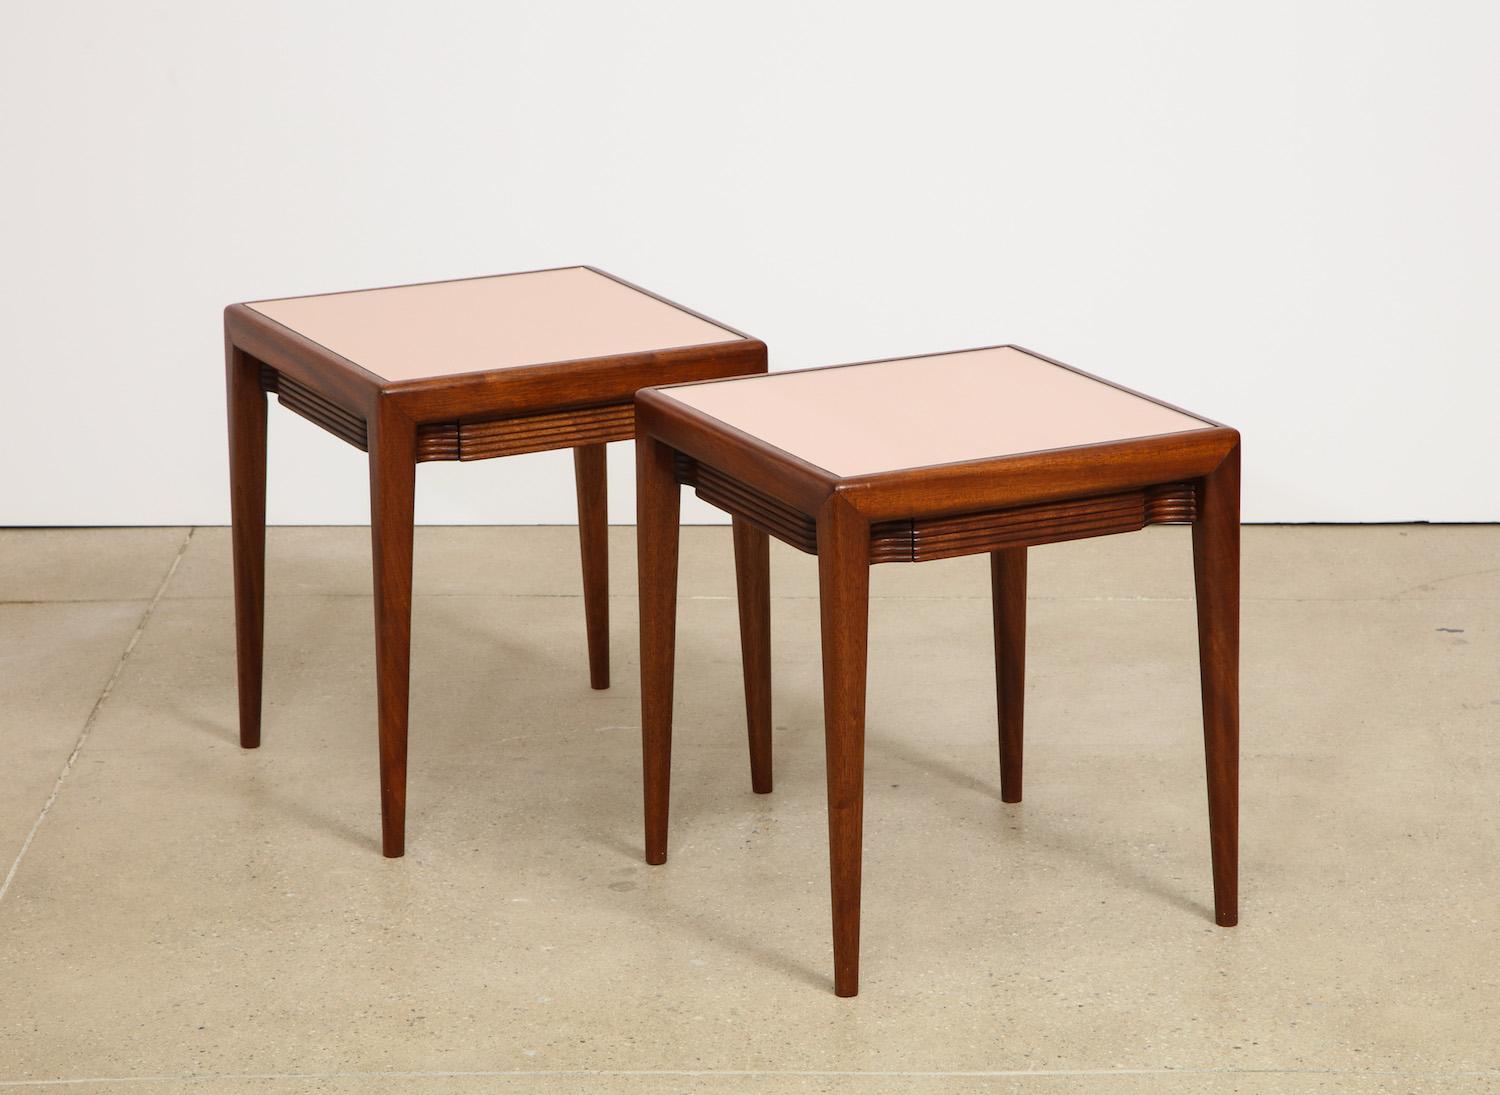 Pair of mirrored-top, low side tables by Osvaldo Borsani. Low square tables of mahogany and inset rose colored mirrored tops with fluted facing on all four sides. One small center drawer per table. A variation of this model lives in the Casa Borsani